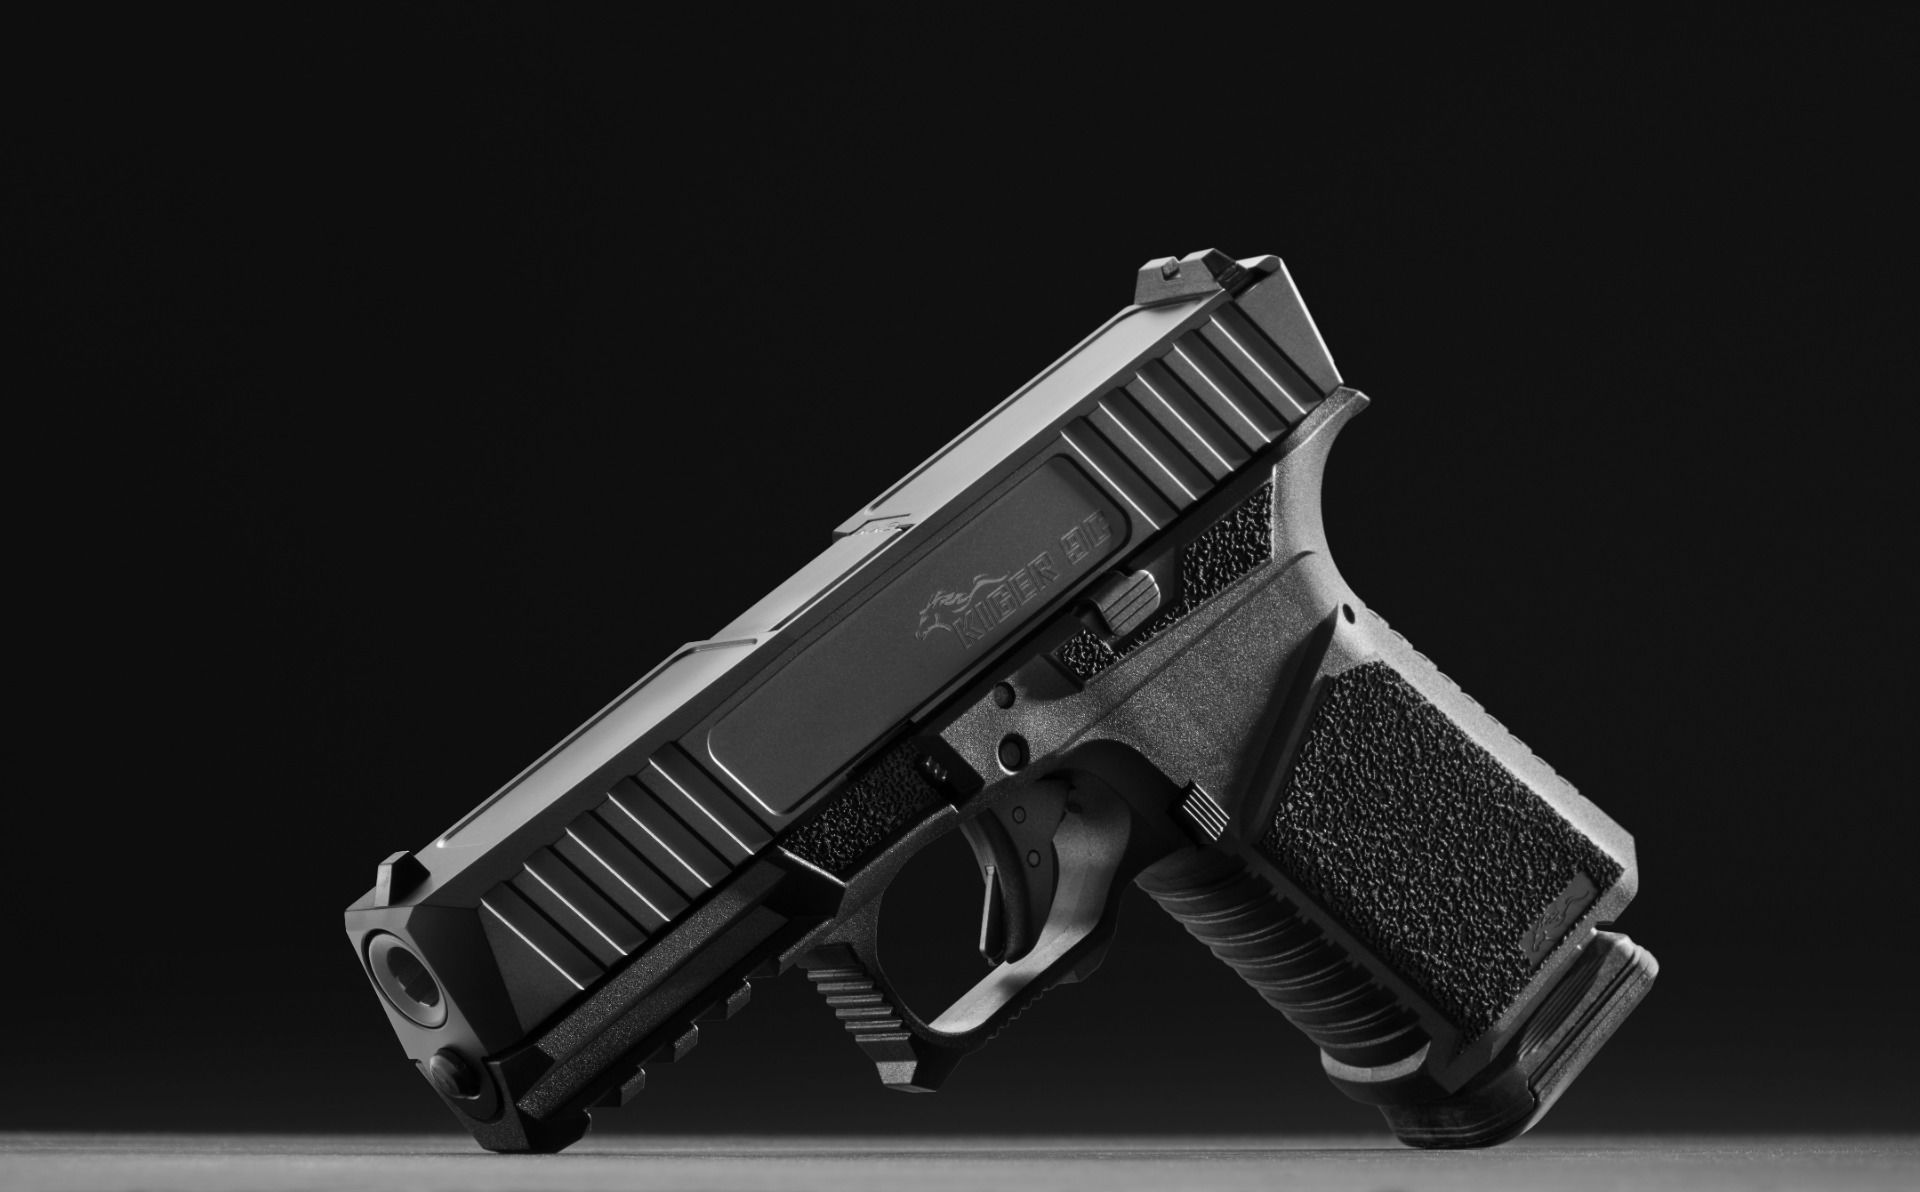 Anderson Manufacturing's First Handgun - The KIGER-9c